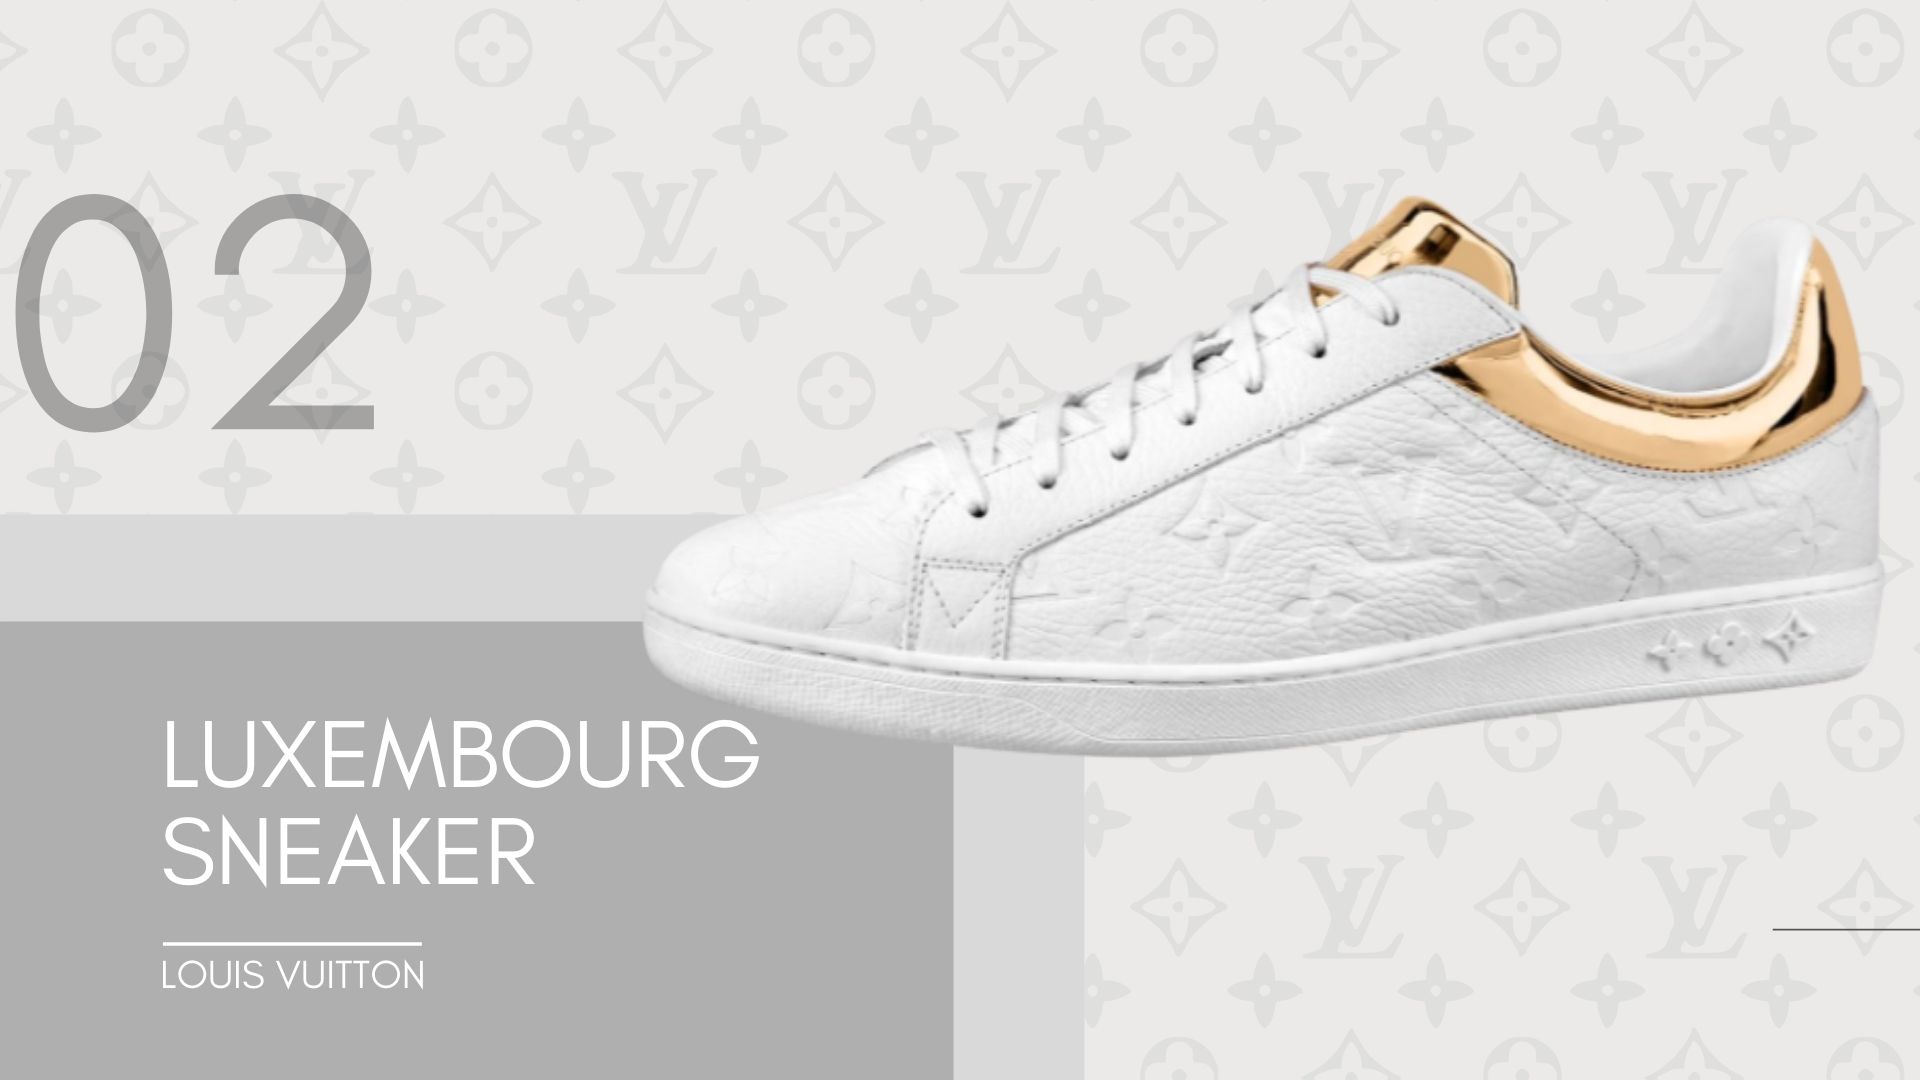 LUXEMBOURG SNEAKER